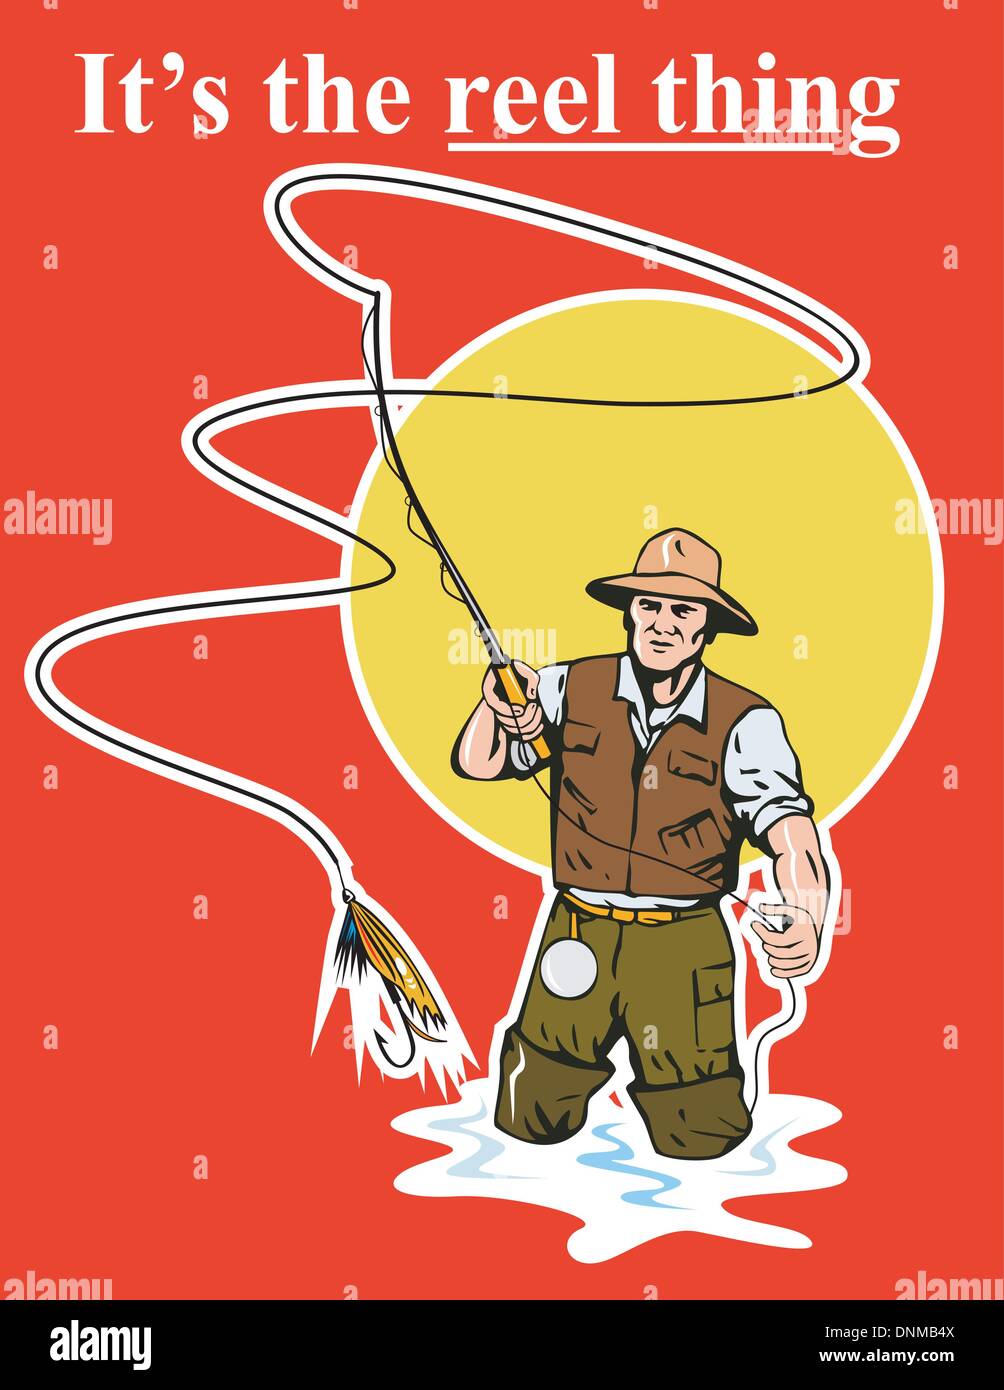 graphic design illustration of a Fly fisherman casting reel with